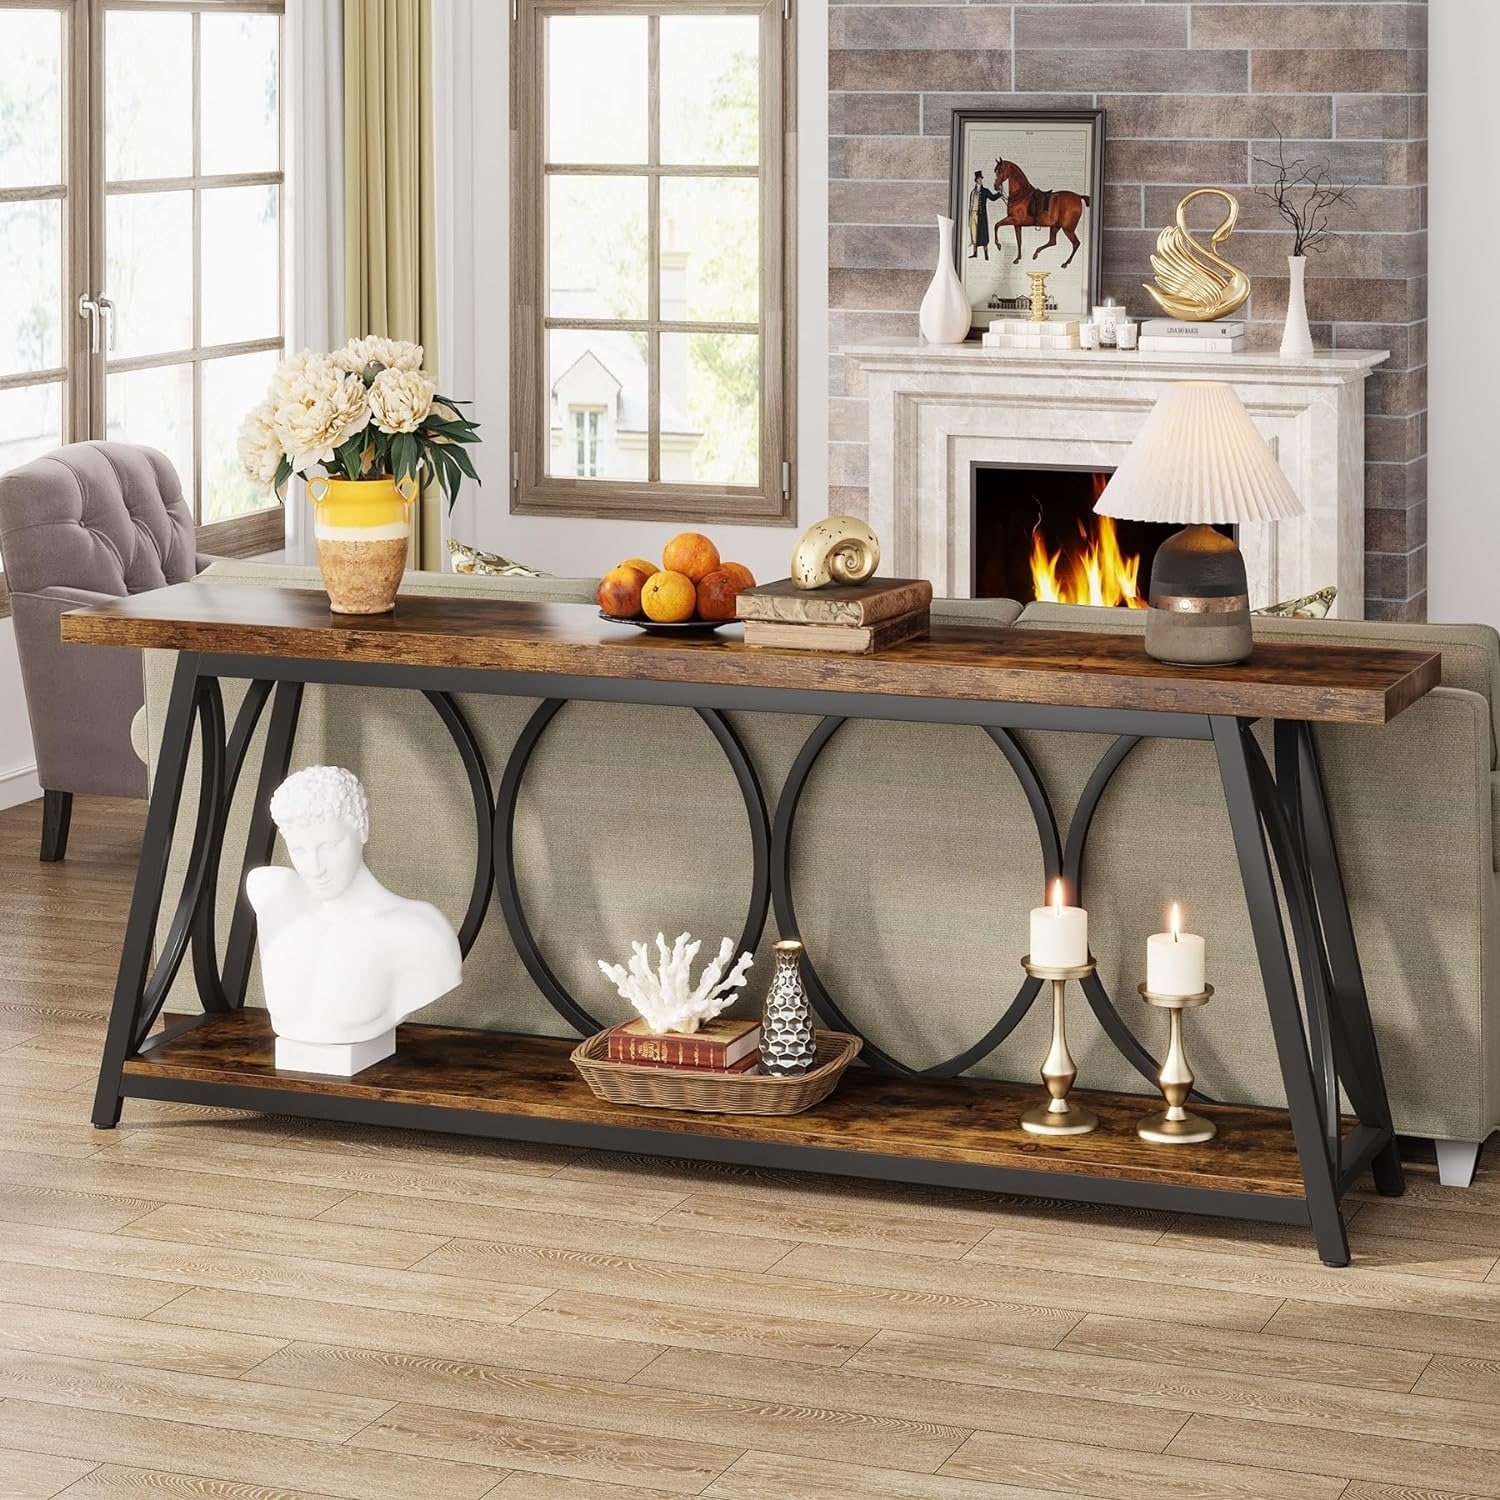 70.9 Inch Extra Long Sofa Table, Industrial Entry Console Table